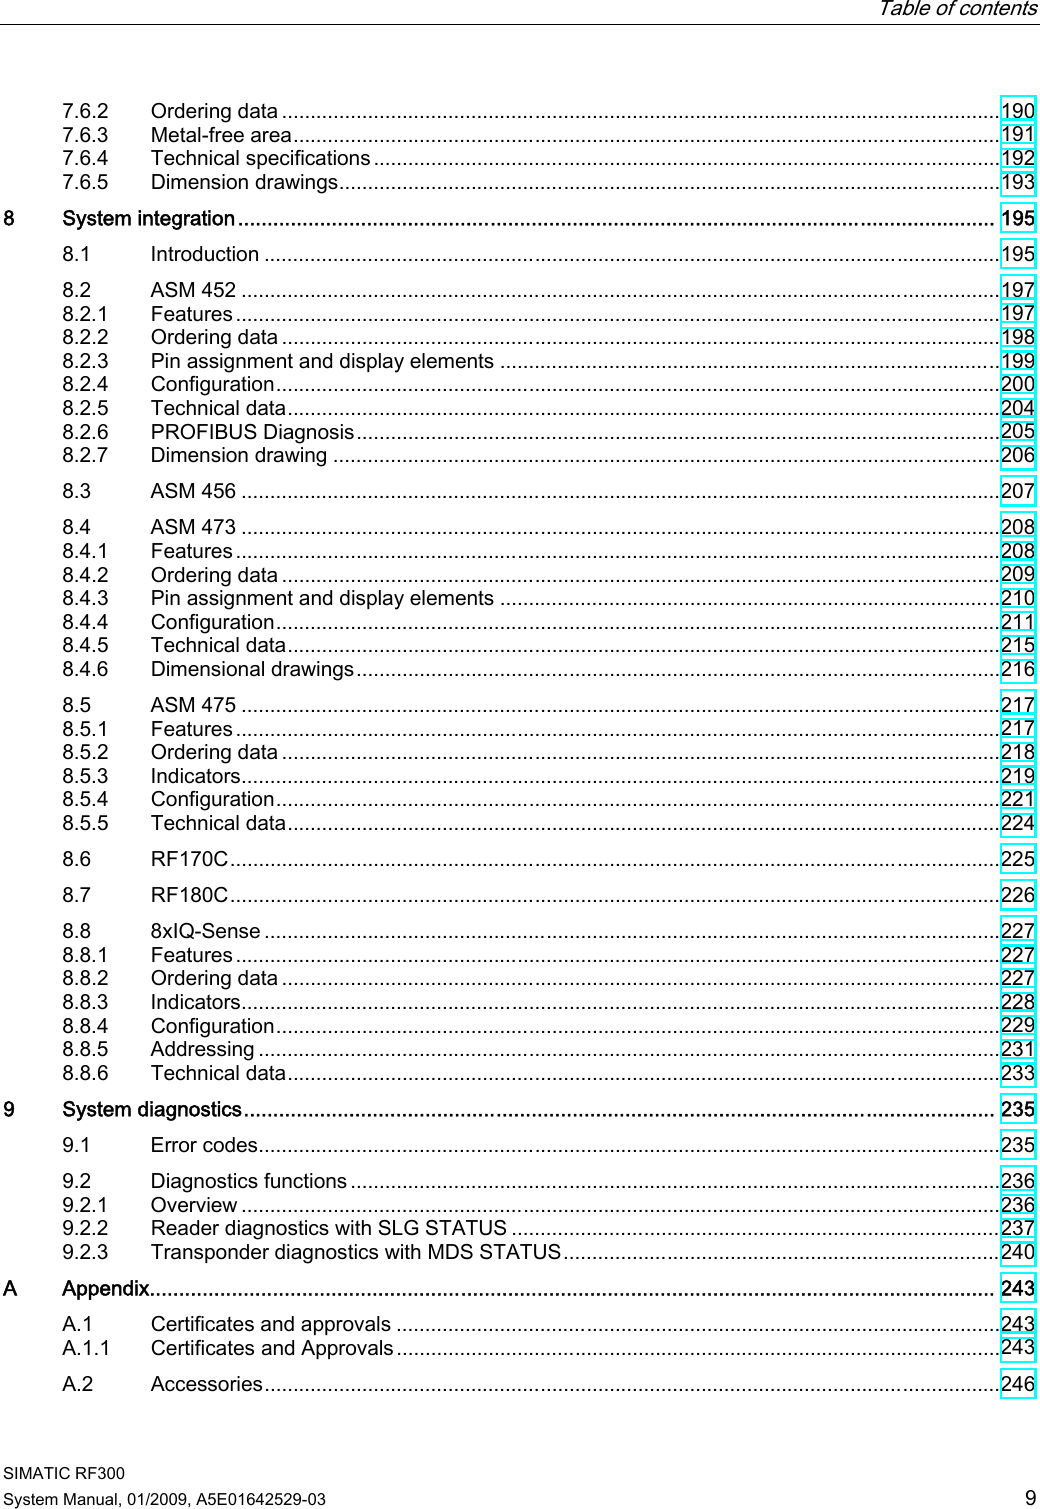   Table of contents   SIMATIC RF300 System Manual, 01/2009, A5E01642529-03  9 7.6.2  Ordering data .............................................................................................................................190 7.6.3  Metal-free area...........................................................................................................................191 7.6.4  Technical specifications .............................................................................................................192 7.6.5  Dimension drawings...................................................................................................................193 8  System integration................................................................................................................................. 195 8.1  Introduction ................................................................................................................................195 8.2  ASM 452 ....................................................................................................................................197 8.2.1  Features.....................................................................................................................................197 8.2.2  Ordering data .............................................................................................................................198 8.2.3  Pin assignment and display elements .......................................................................................199 8.2.4  Configuration..............................................................................................................................200 8.2.5  Technical data............................................................................................................................204 8.2.6  PROFIBUS Diagnosis................................................................................................................205 8.2.7  Dimension drawing ....................................................................................................................206 8.3  ASM 456 ....................................................................................................................................207 8.4  ASM 473 ....................................................................................................................................208 8.4.1  Features.....................................................................................................................................208 8.4.2  Ordering data .............................................................................................................................209 8.4.3  Pin assignment and display elements .......................................................................................210 8.4.4  Configuration..............................................................................................................................211 8.4.5  Technical data............................................................................................................................215 8.4.6  Dimensional drawings................................................................................................................216 8.5  ASM 475 ....................................................................................................................................217 8.5.1  Features.....................................................................................................................................217 8.5.2  Ordering data .............................................................................................................................218 8.5.3  Indicators....................................................................................................................................219 8.5.4  Configuration..............................................................................................................................221 8.5.5  Technical data............................................................................................................................224 8.6  RF170C......................................................................................................................................225 8.7  RF180C......................................................................................................................................226 8.8  8xIQ-Sense ................................................................................................................................227 8.8.1  Features.....................................................................................................................................227 8.8.2  Ordering data .............................................................................................................................227 8.8.3  Indicators....................................................................................................................................228 8.8.4  Configuration..............................................................................................................................229 8.8.5  Addressing .................................................................................................................................231 8.8.6  Technical data............................................................................................................................233 9  System diagnostics................................................................................................................................ 235 9.1  Error codes.................................................................................................................................235 9.2  Diagnostics functions .................................................................................................................236 9.2.1  Overview ....................................................................................................................................236 9.2.2  Reader diagnostics with SLG STATUS .....................................................................................237 9.2.3  Transponder diagnostics with MDS STATUS............................................................................240 A  Appendix................................................................................................................................................ 243 A.1  Certificates and approvals .........................................................................................................243 A.1.1  Certificates and Approvals.........................................................................................................243 A.2  Accessories................................................................................................................................246 